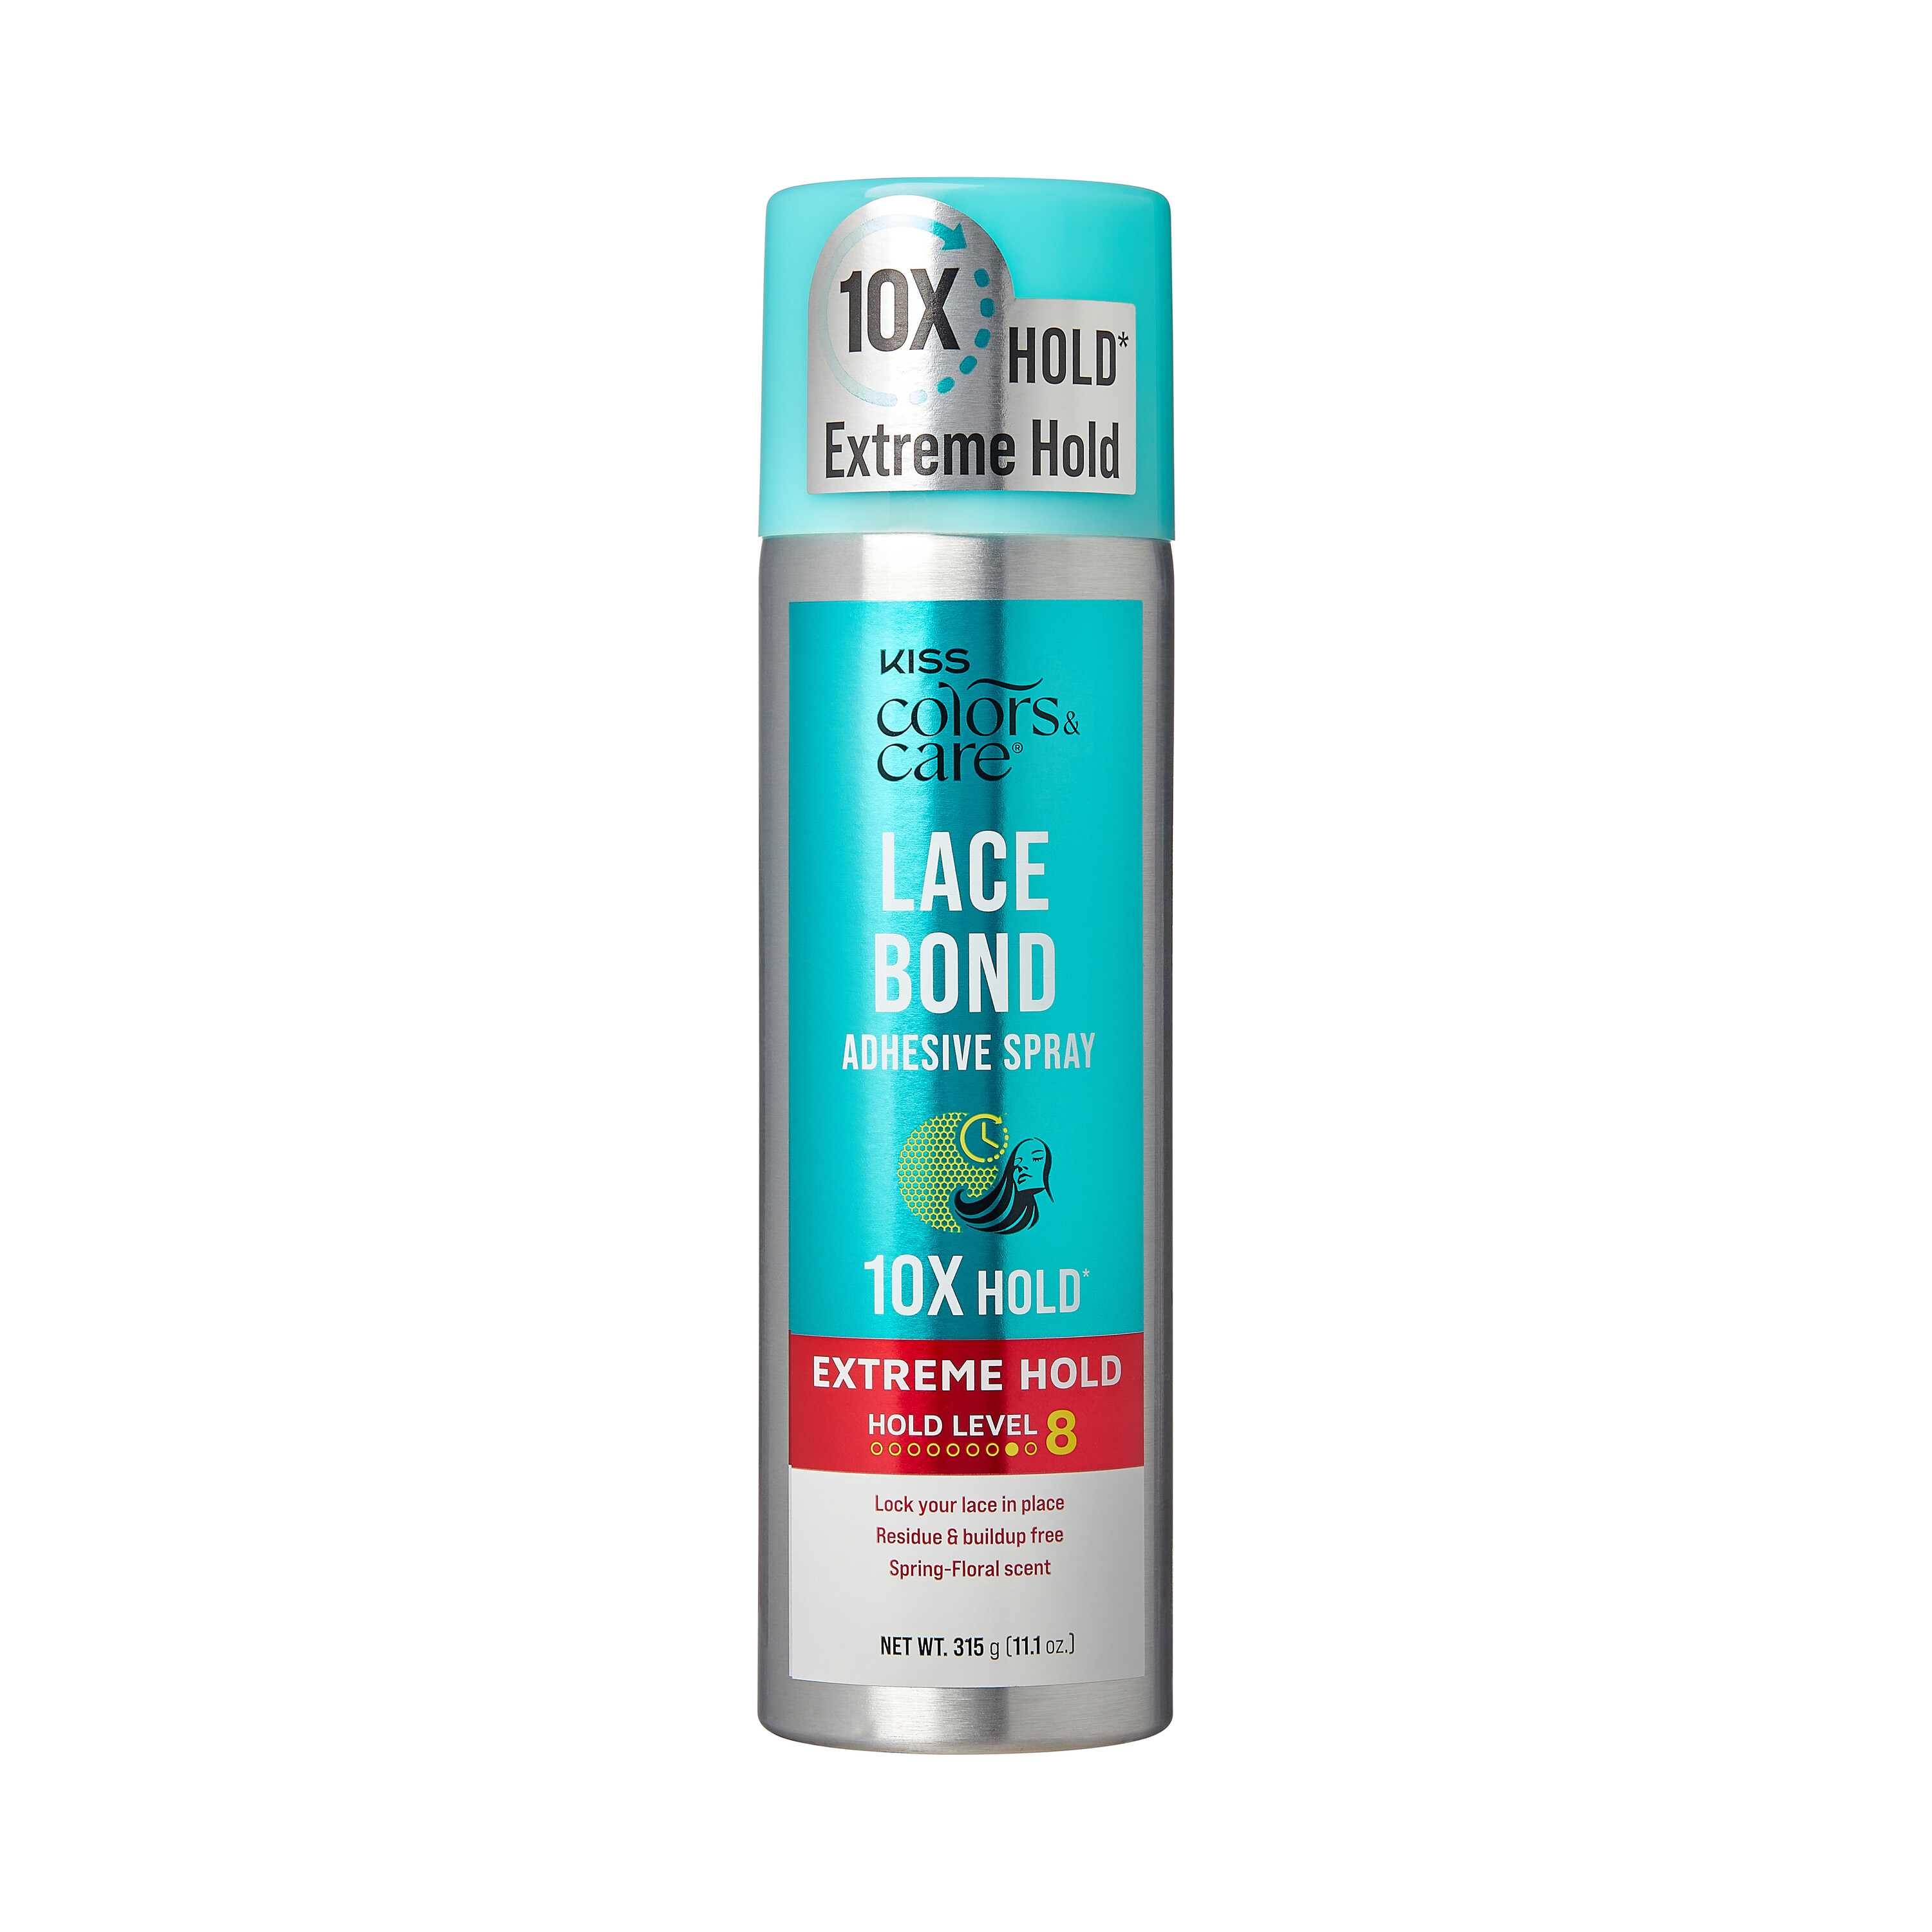 KISS Colors & Care Wig Lace Bond Adhesive Spray, Level 8 Extreme Hold, 11.1 oz. - image 1 of 7